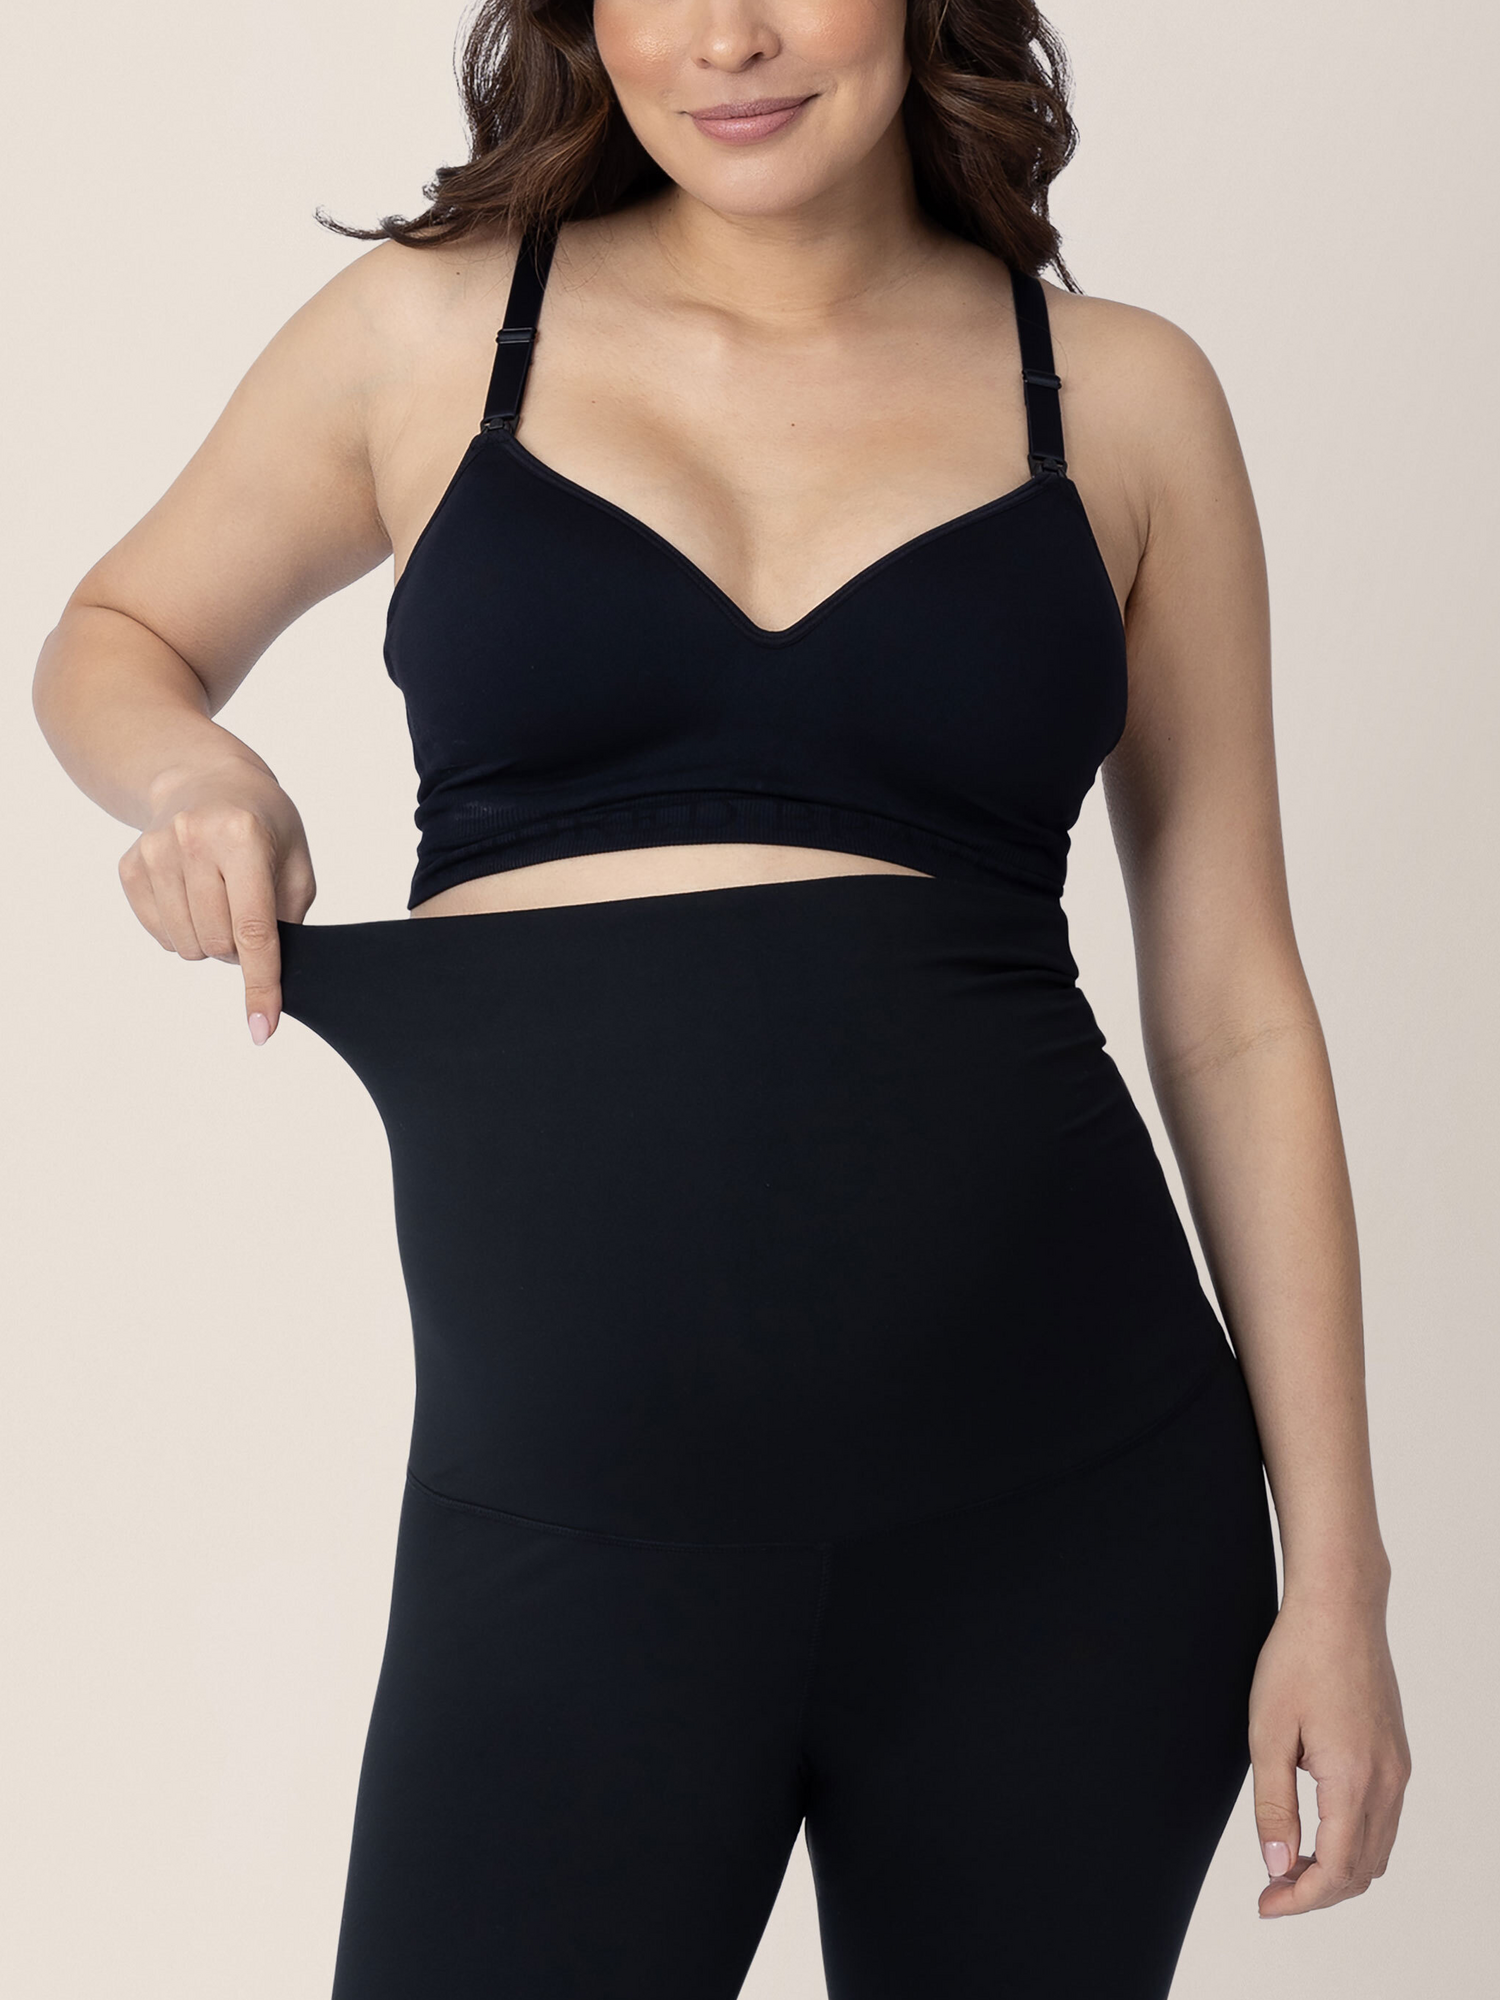 Model showing the stretchy waistband on the classic Louisa Maternity & Postpartum Legging in Black.